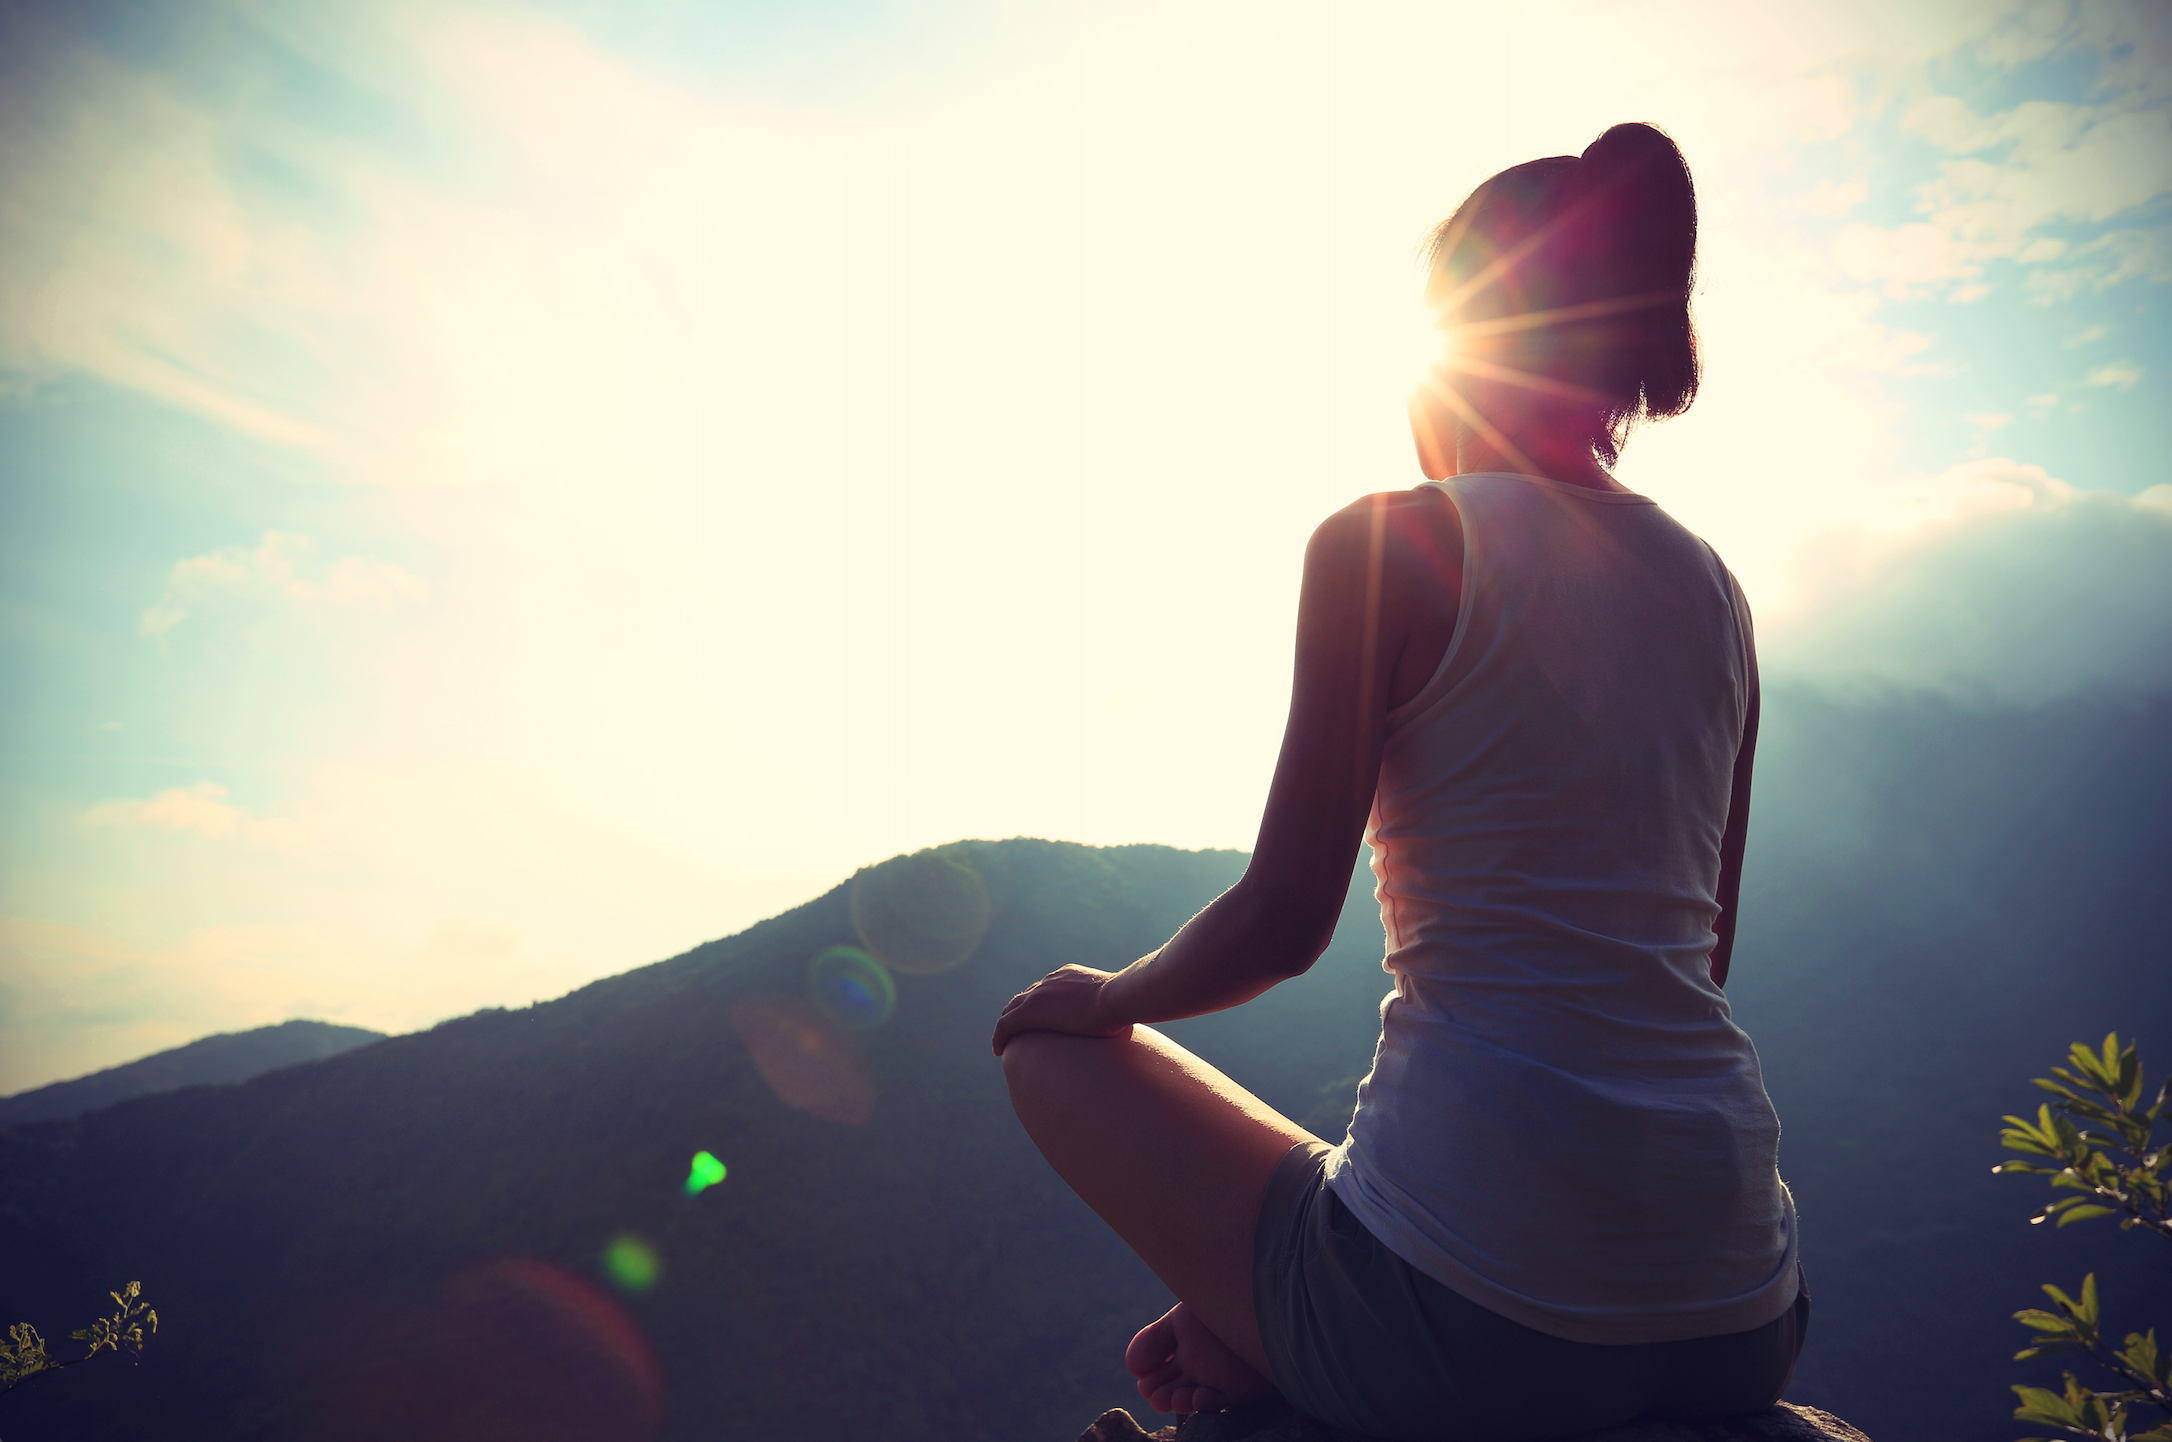 What You Need to Know About Meditation